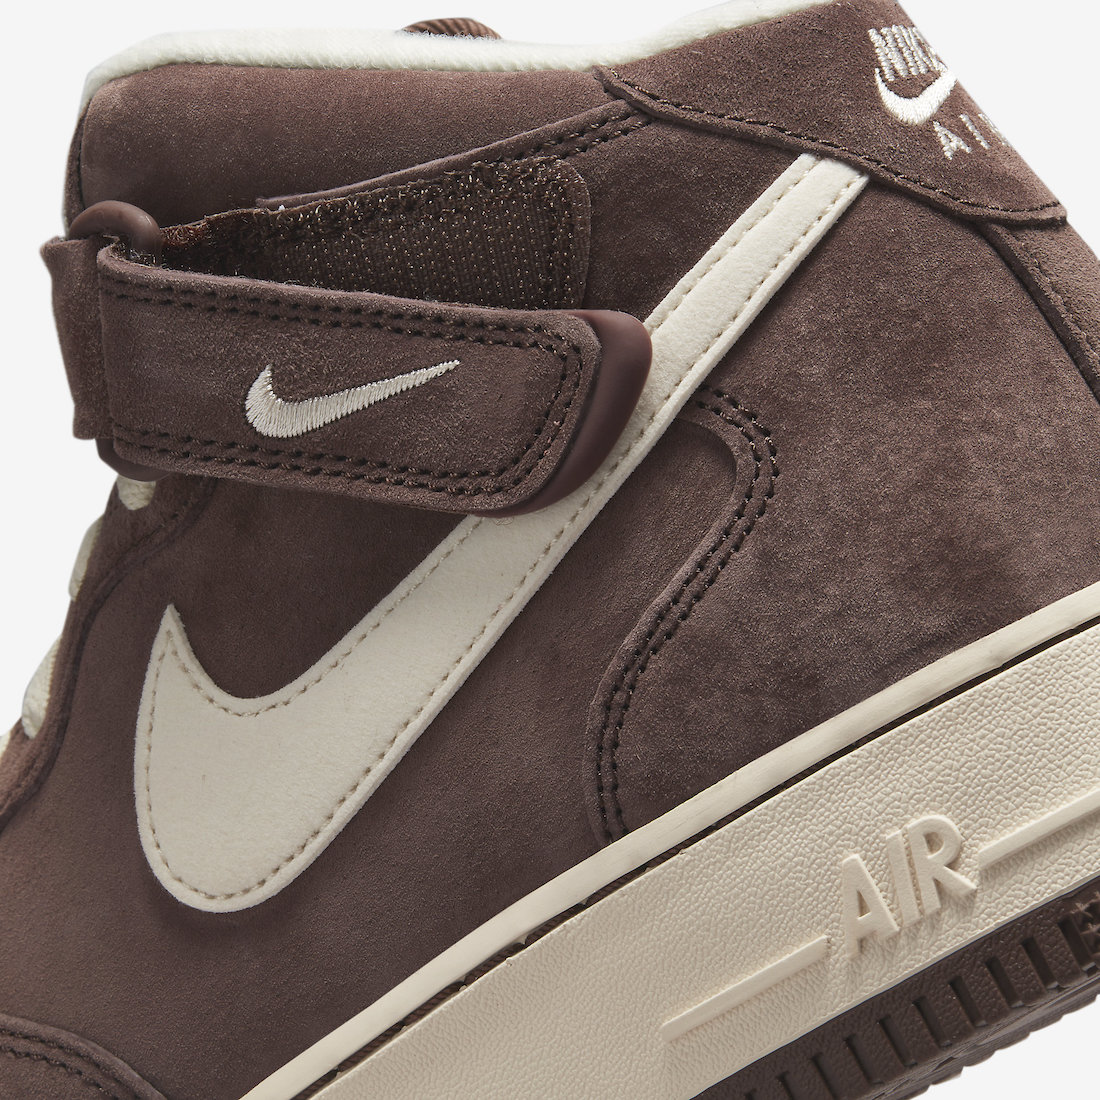 Nike Air Force 1 Mid Chocolate DM0107 200 Release Date 8